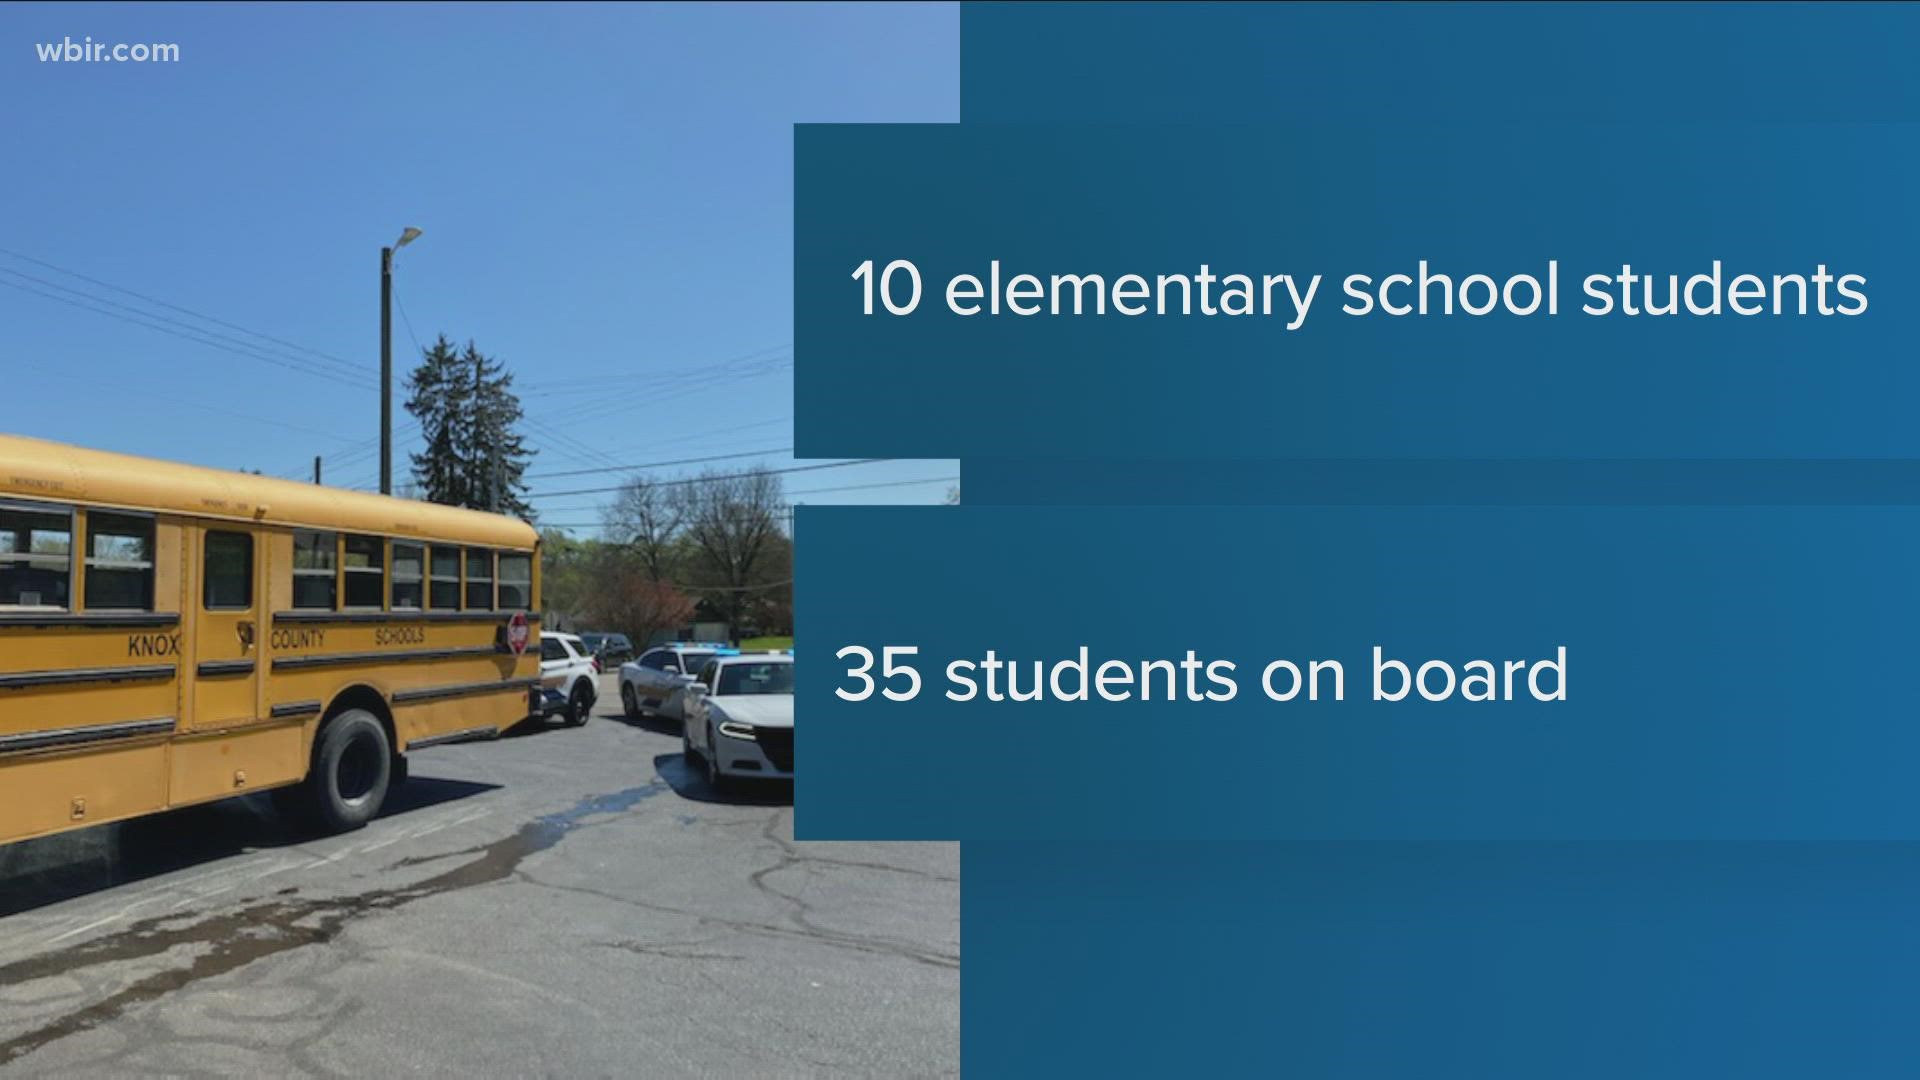 The school bus had around 35 students on it, and none were taken to the hospital, according to authorities.